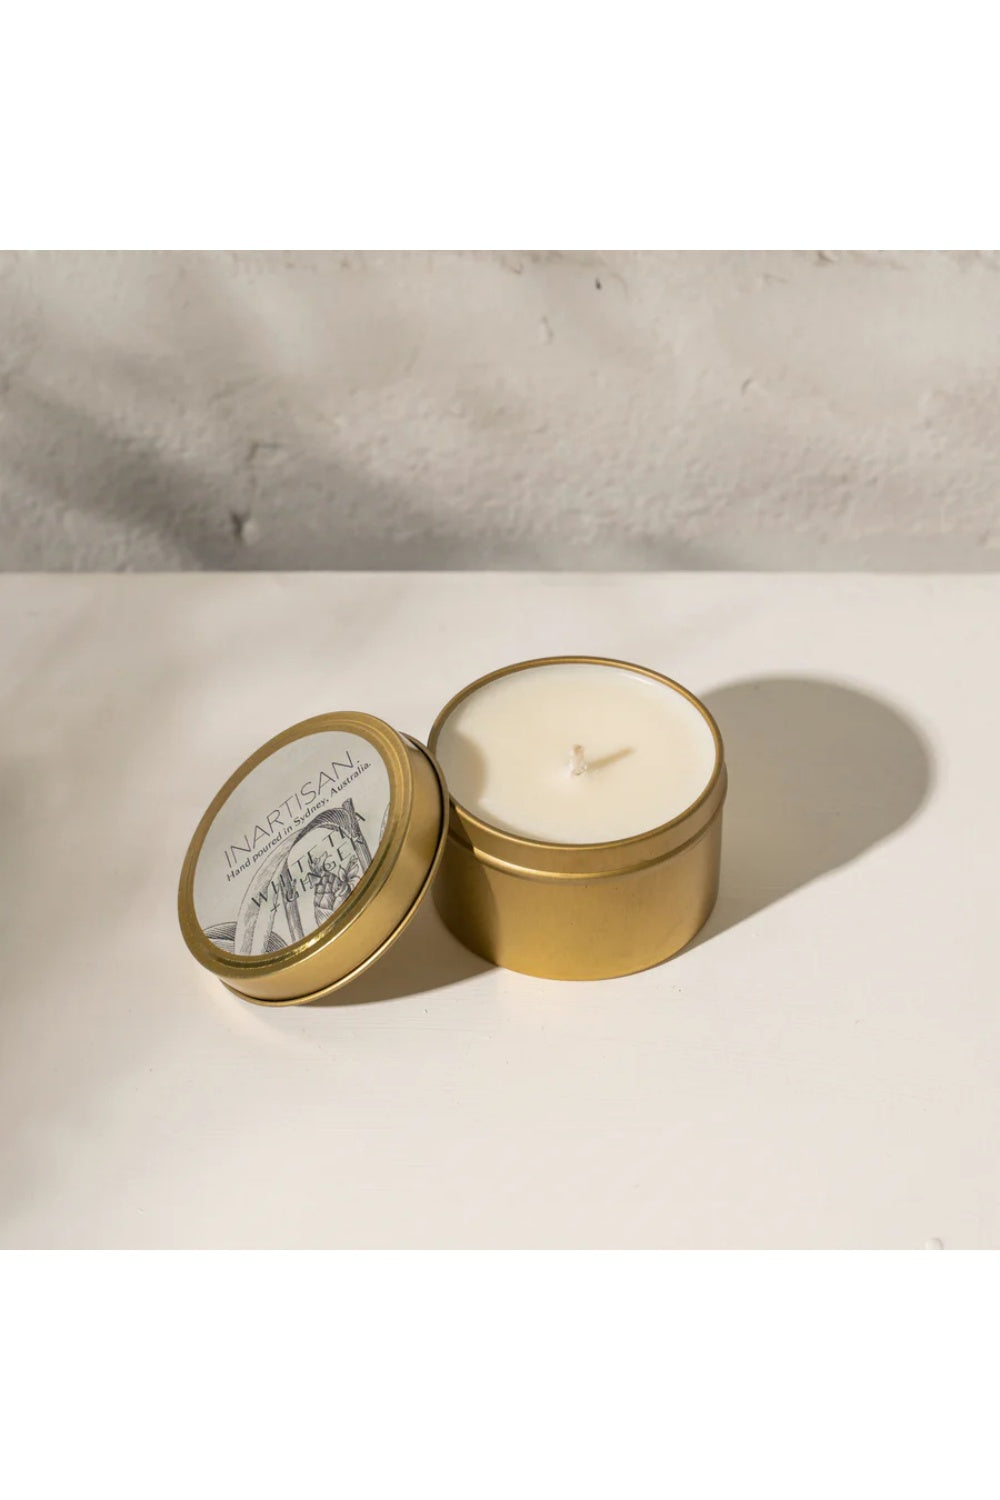 TRAVEL CANDLE WHITE TEA & GINGER